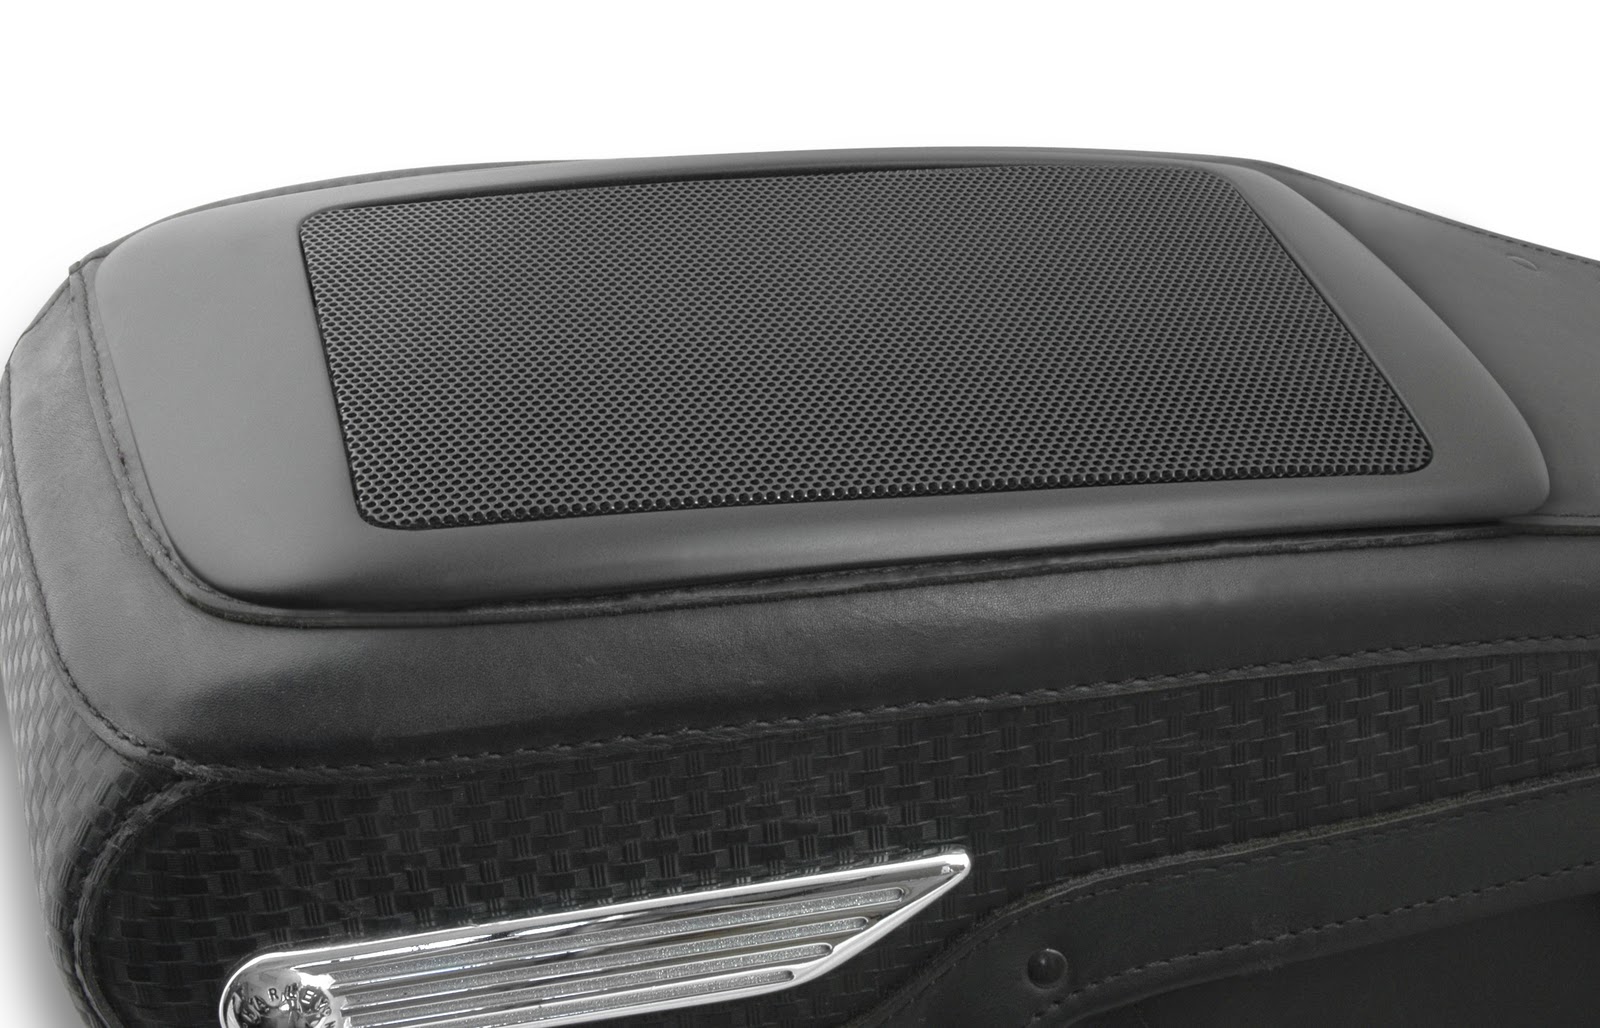 V-Twin News: Cycle Sounds Road King Classic Leather Saddlebag Audio System